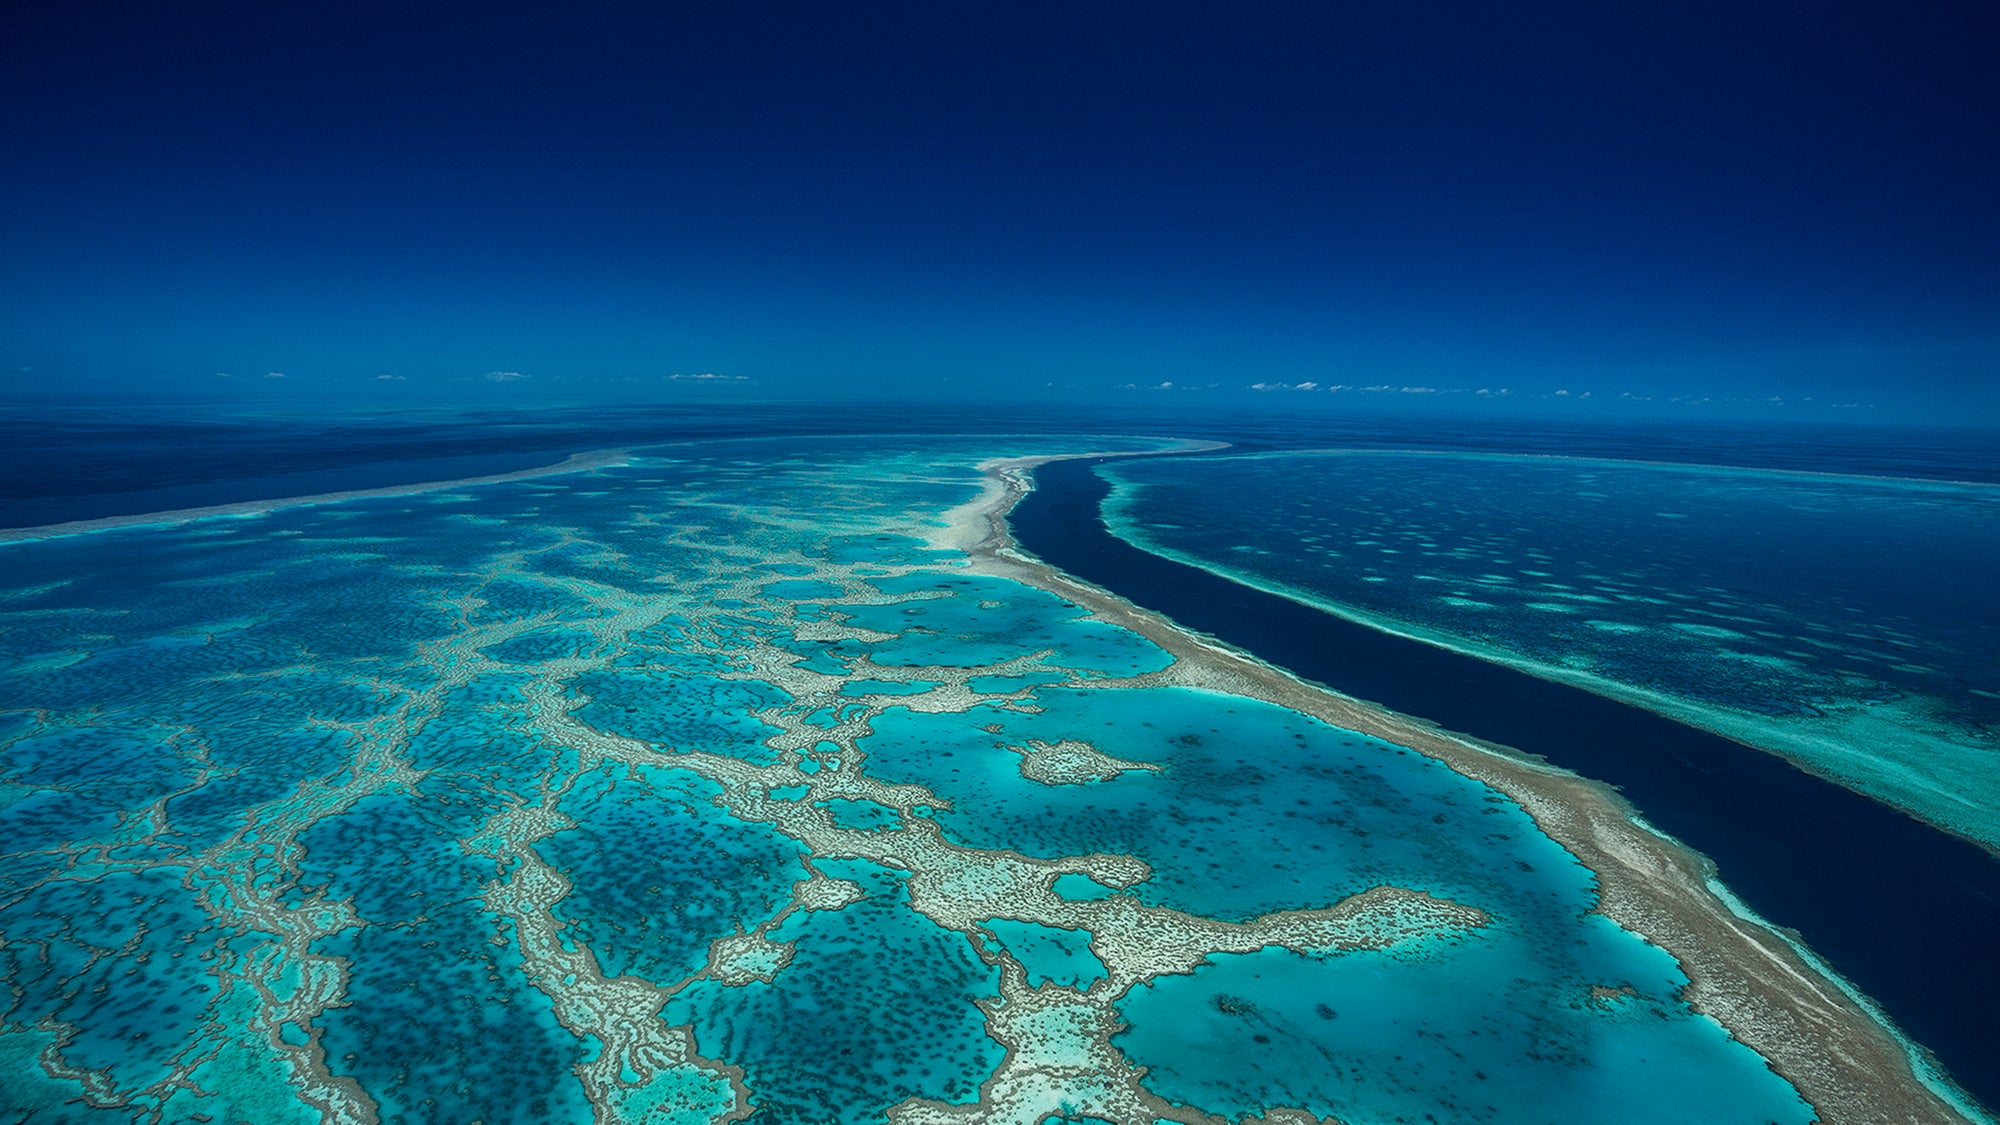 - The Great Barrier Reef -